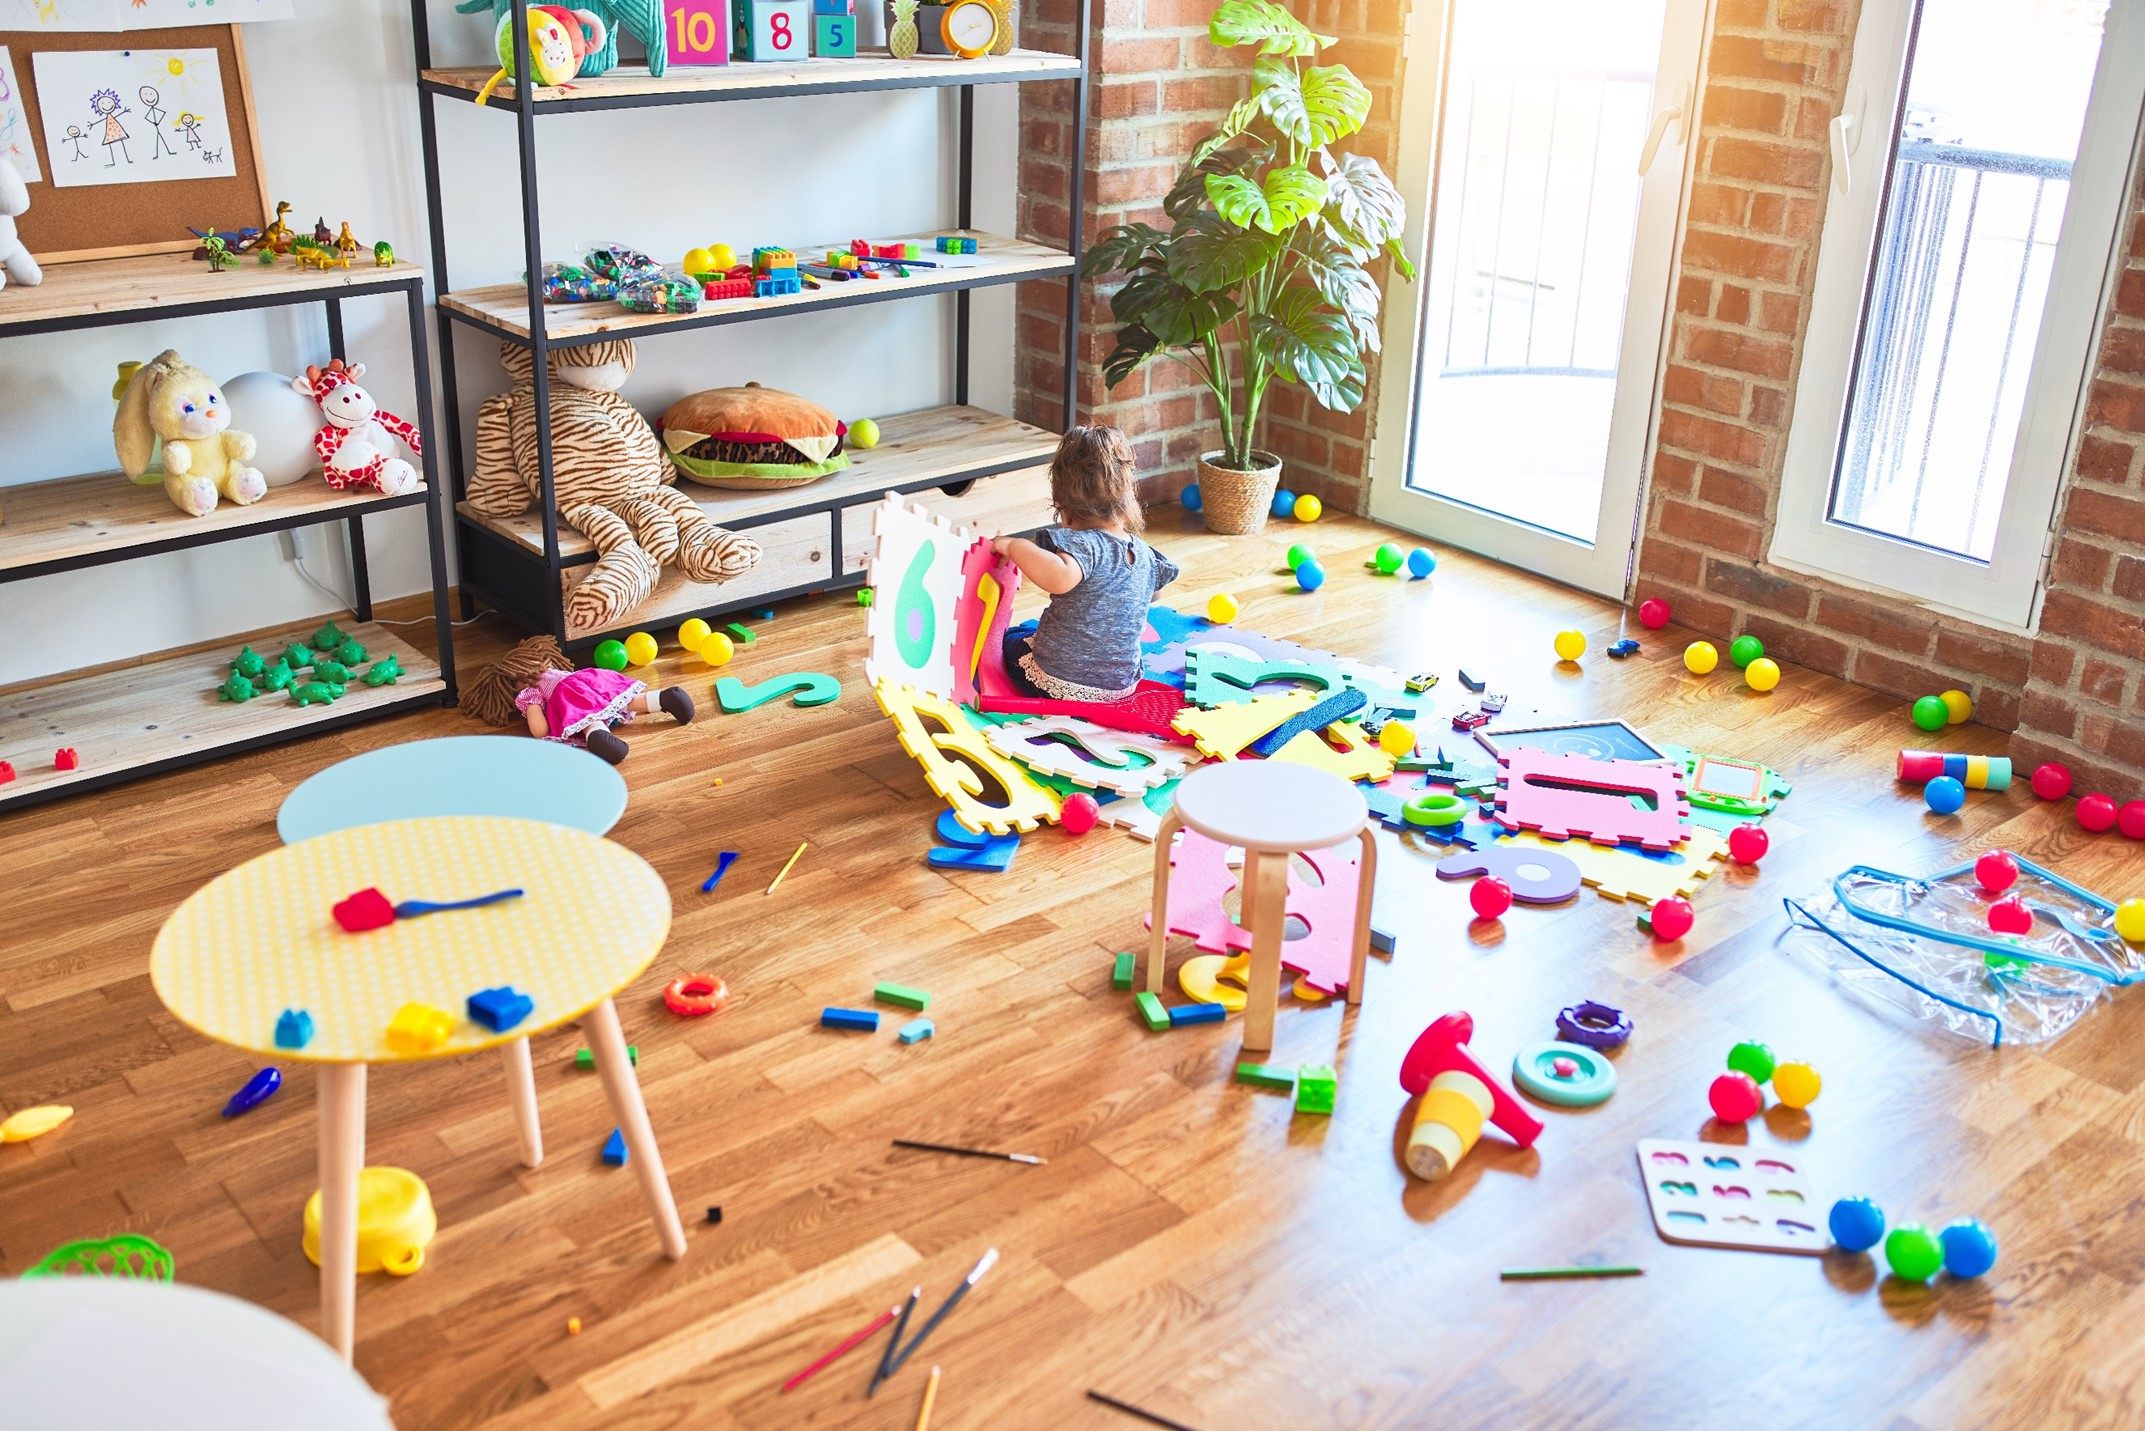 Children playing with various toys in a room 